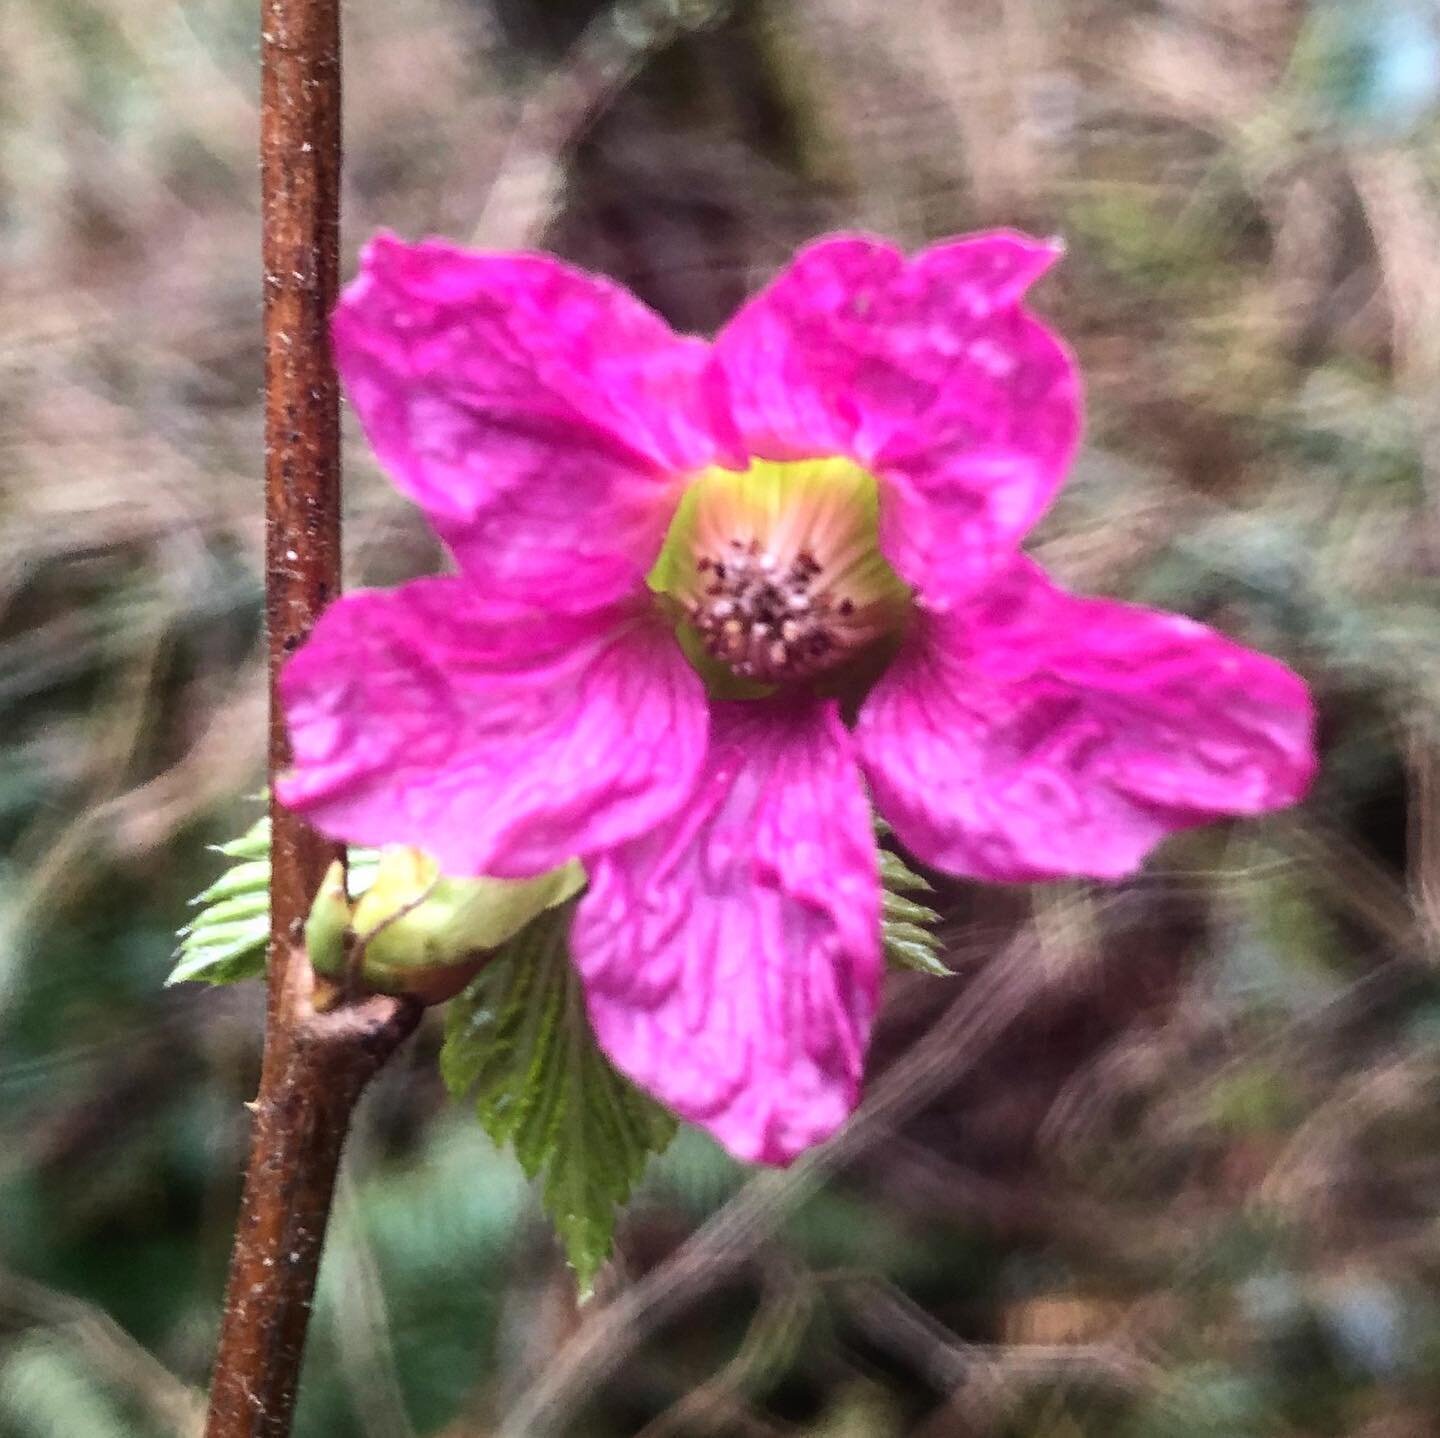 On a brighter note...spring is here!  #salmonberry #springishere